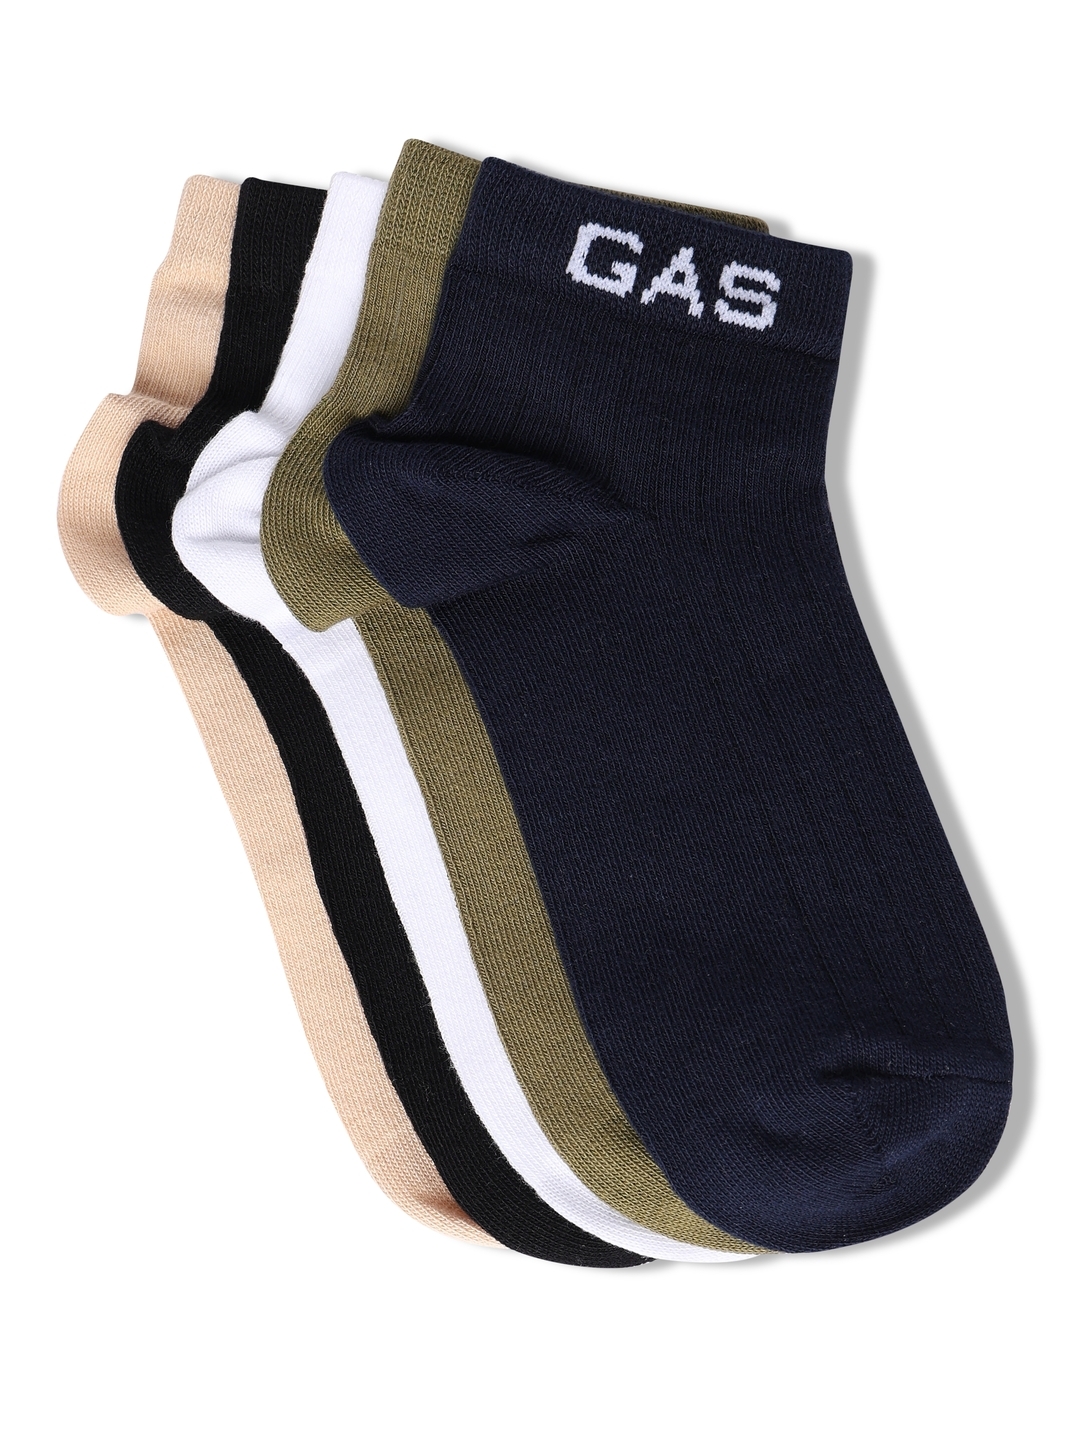 CRISTO IN Assorted Solid Socks (Pack of 5)